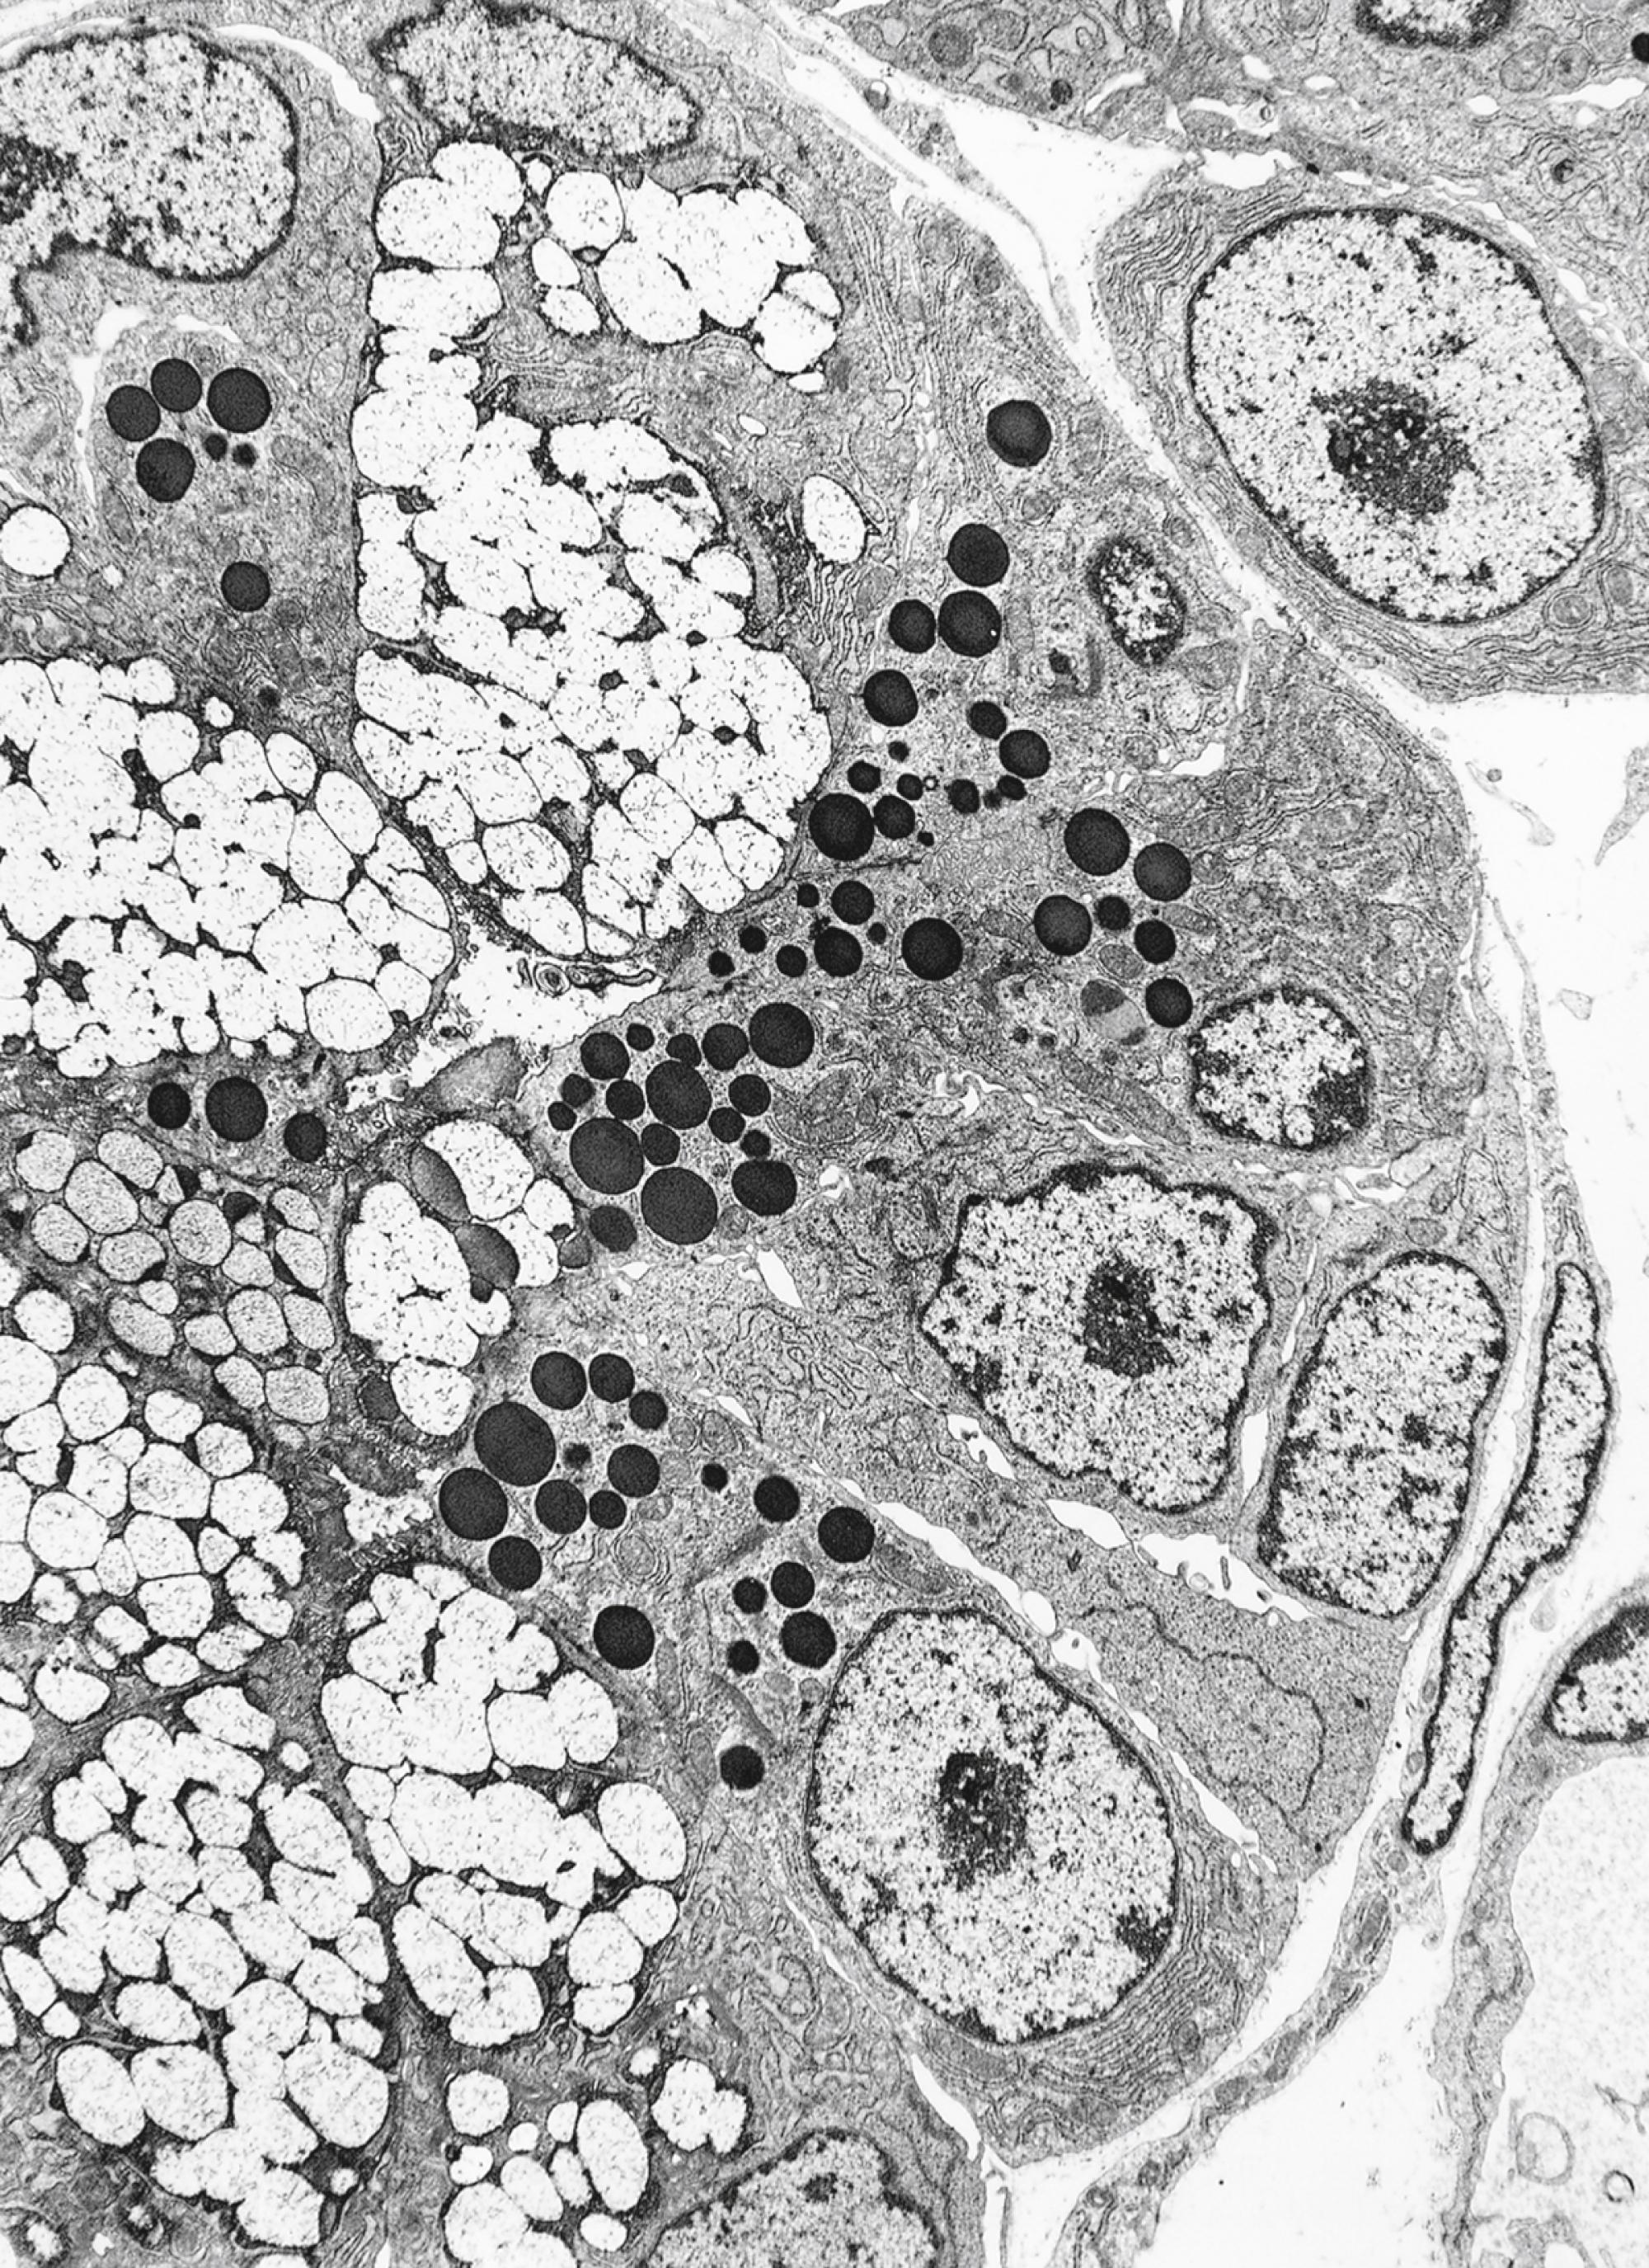 Fig. 18.3, Electron micrograph of the rat sublingual gland, displaying serous and mucous granules in the cytoplasm of their acinar cells. Note that the nuclei of serous cells are round, whereas the nuclei of mucous cells are flattened. Observe also that the serous secretory products are present as round, dense, dark structures, and the mucous secretory products are mostly dissolved and appear light in color and spongy (×5400).